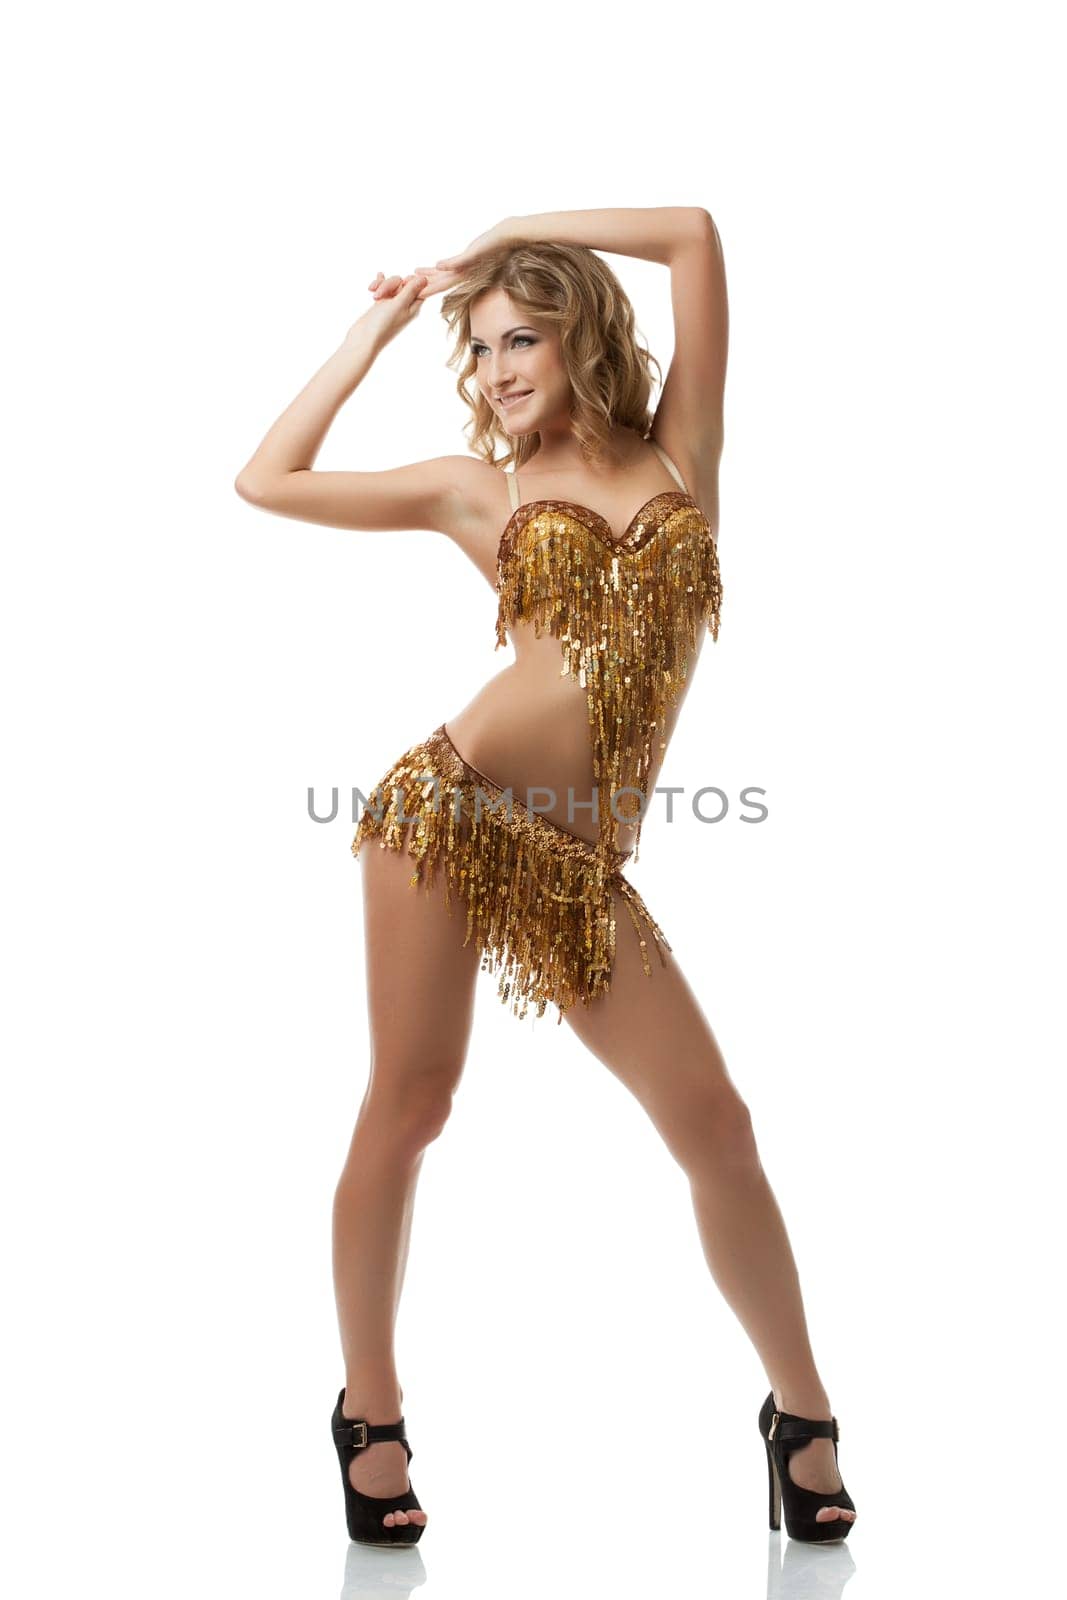 Coquettish fair-haired woman dancing in studio by rivertime